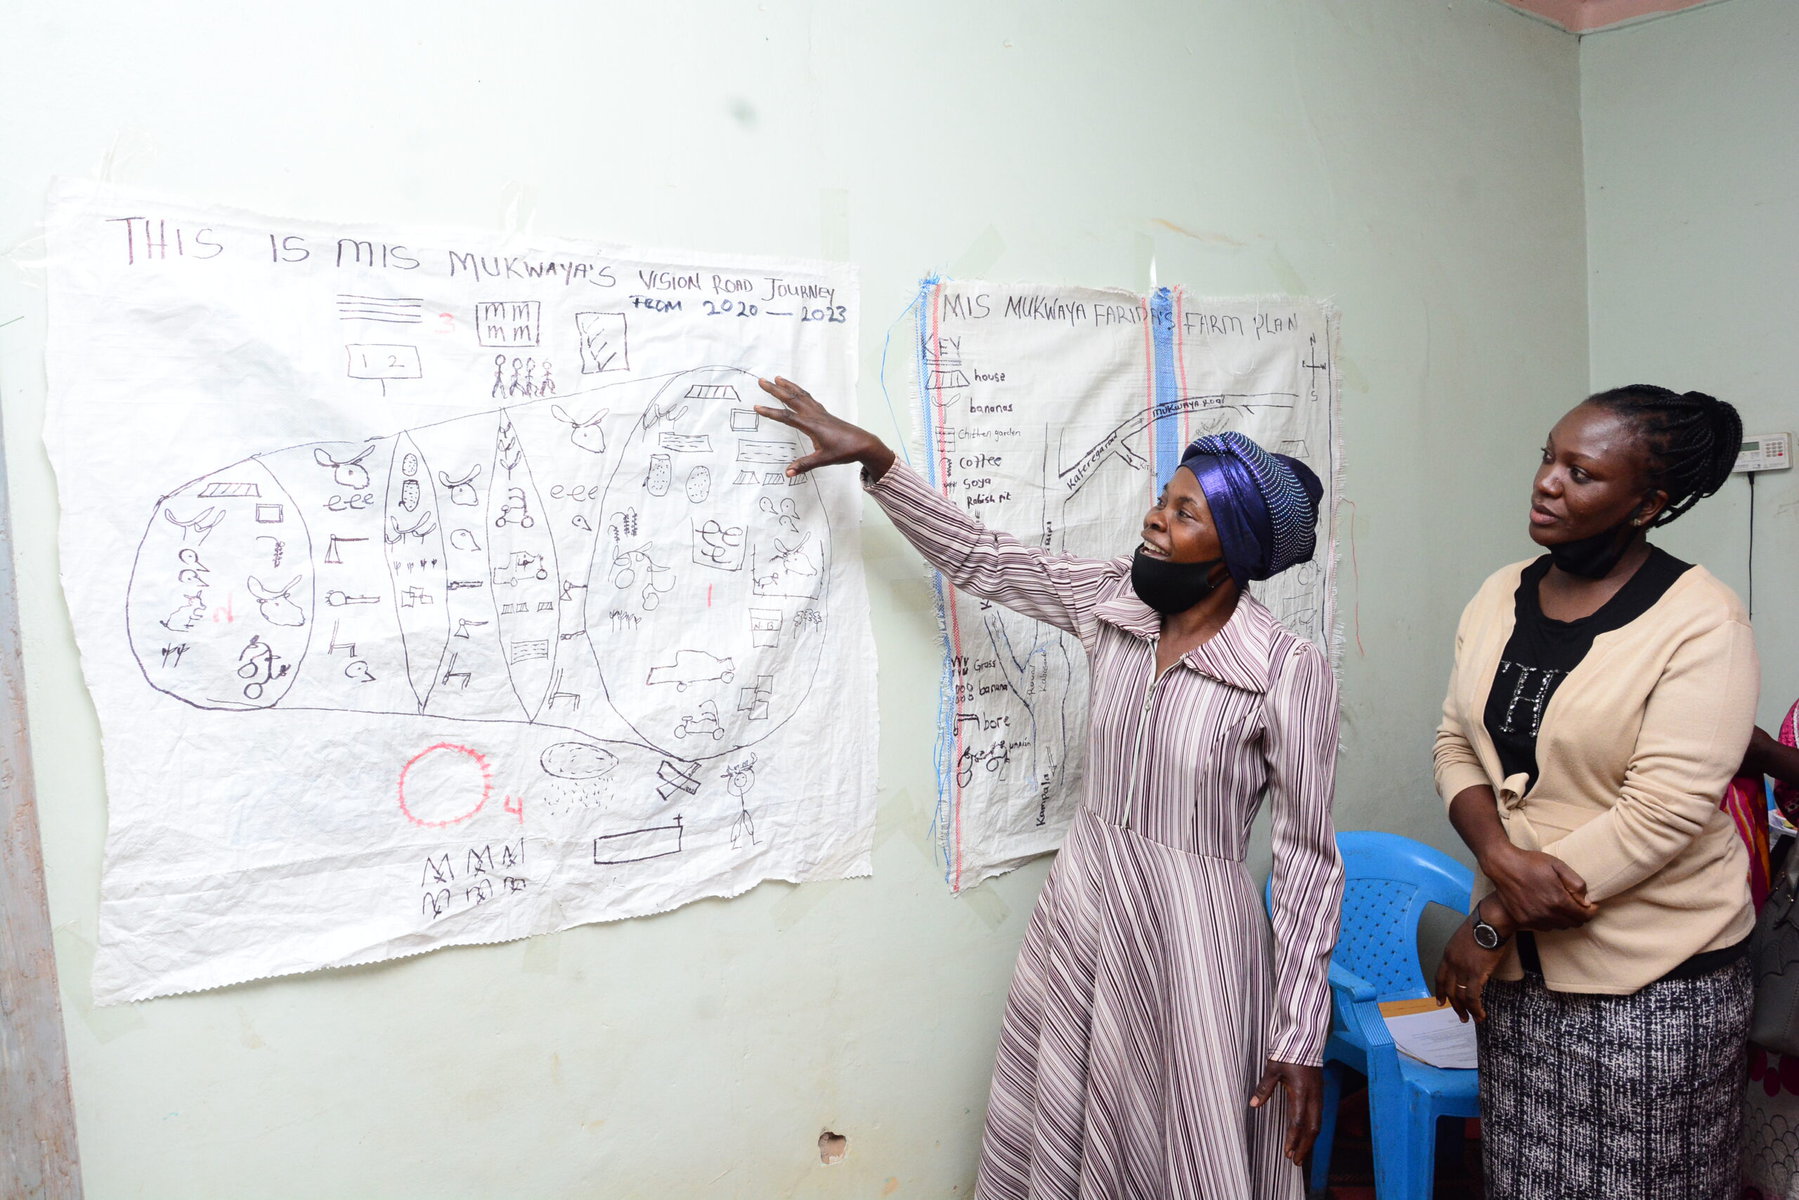 Faridah Nakayiza explains her vision road journey, which she has drawn and hung on a wall.